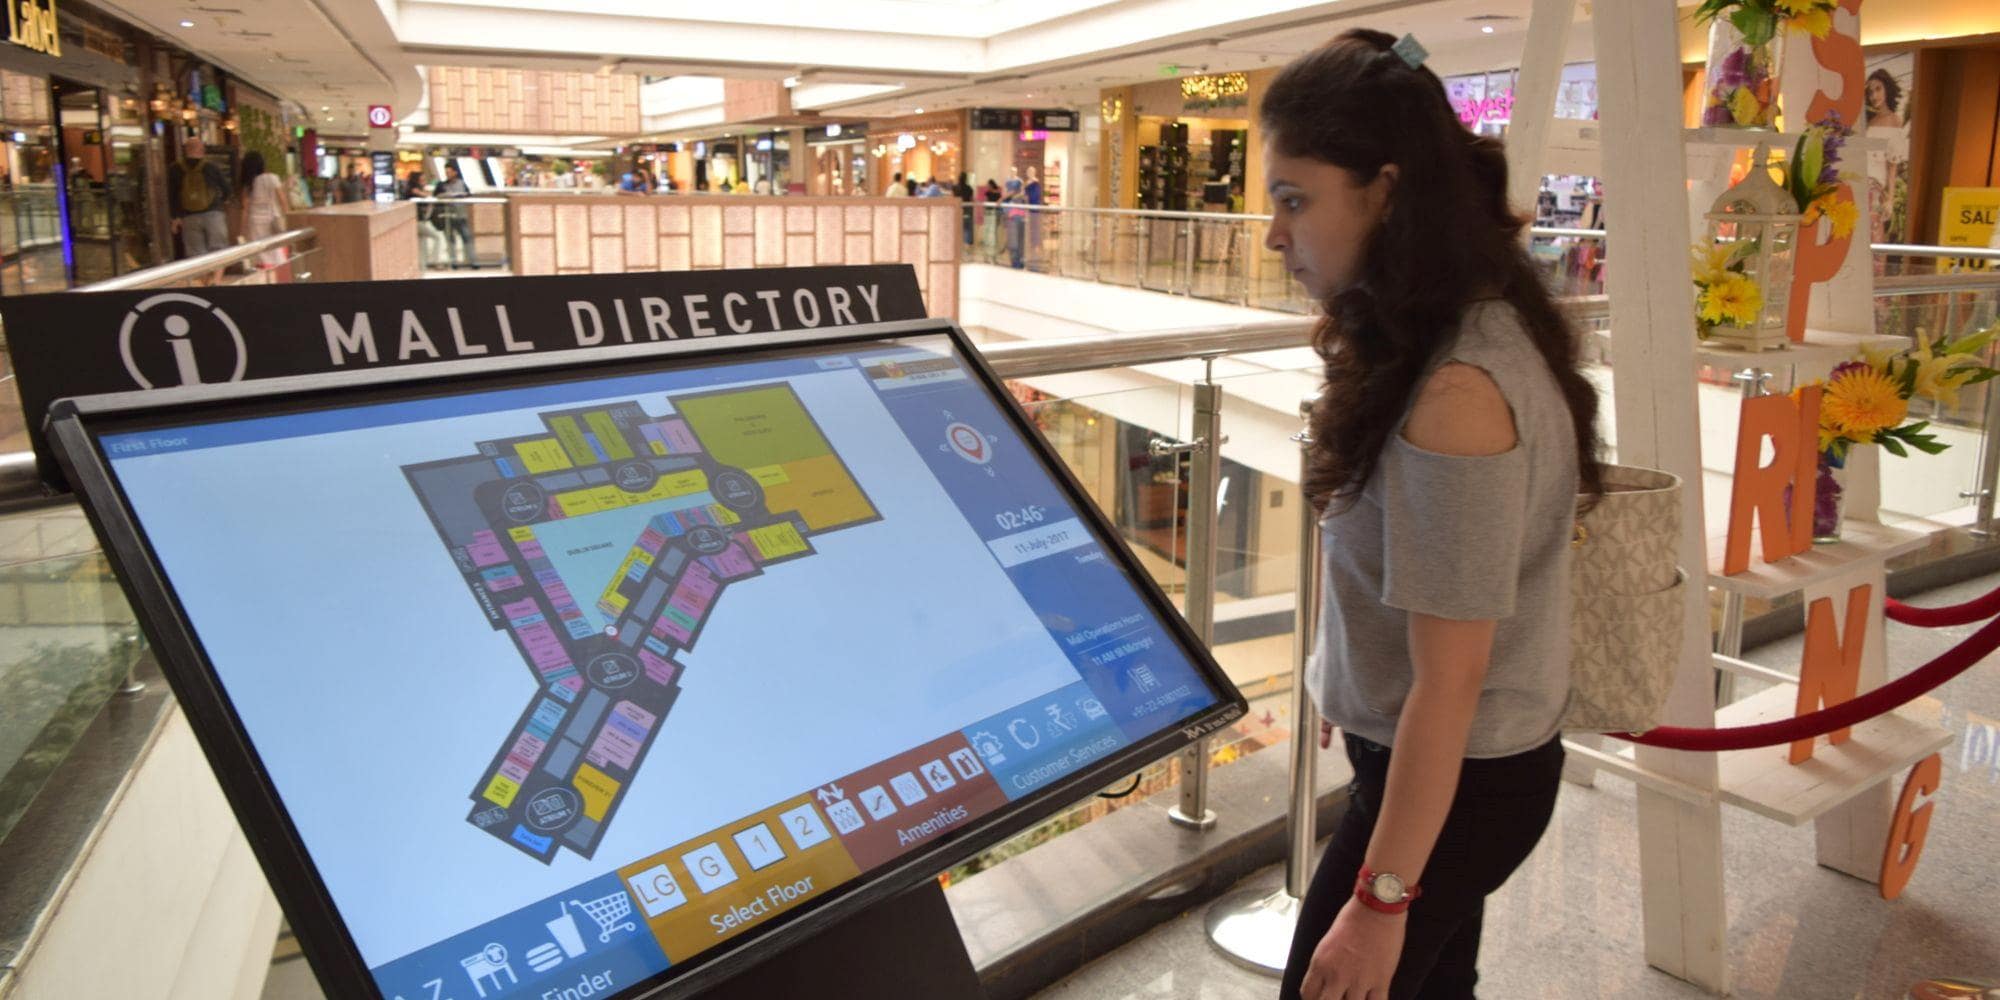 An Interactive mall directory helping a shopper better navigate the shops, floors, and amenities that the mall has to offer.